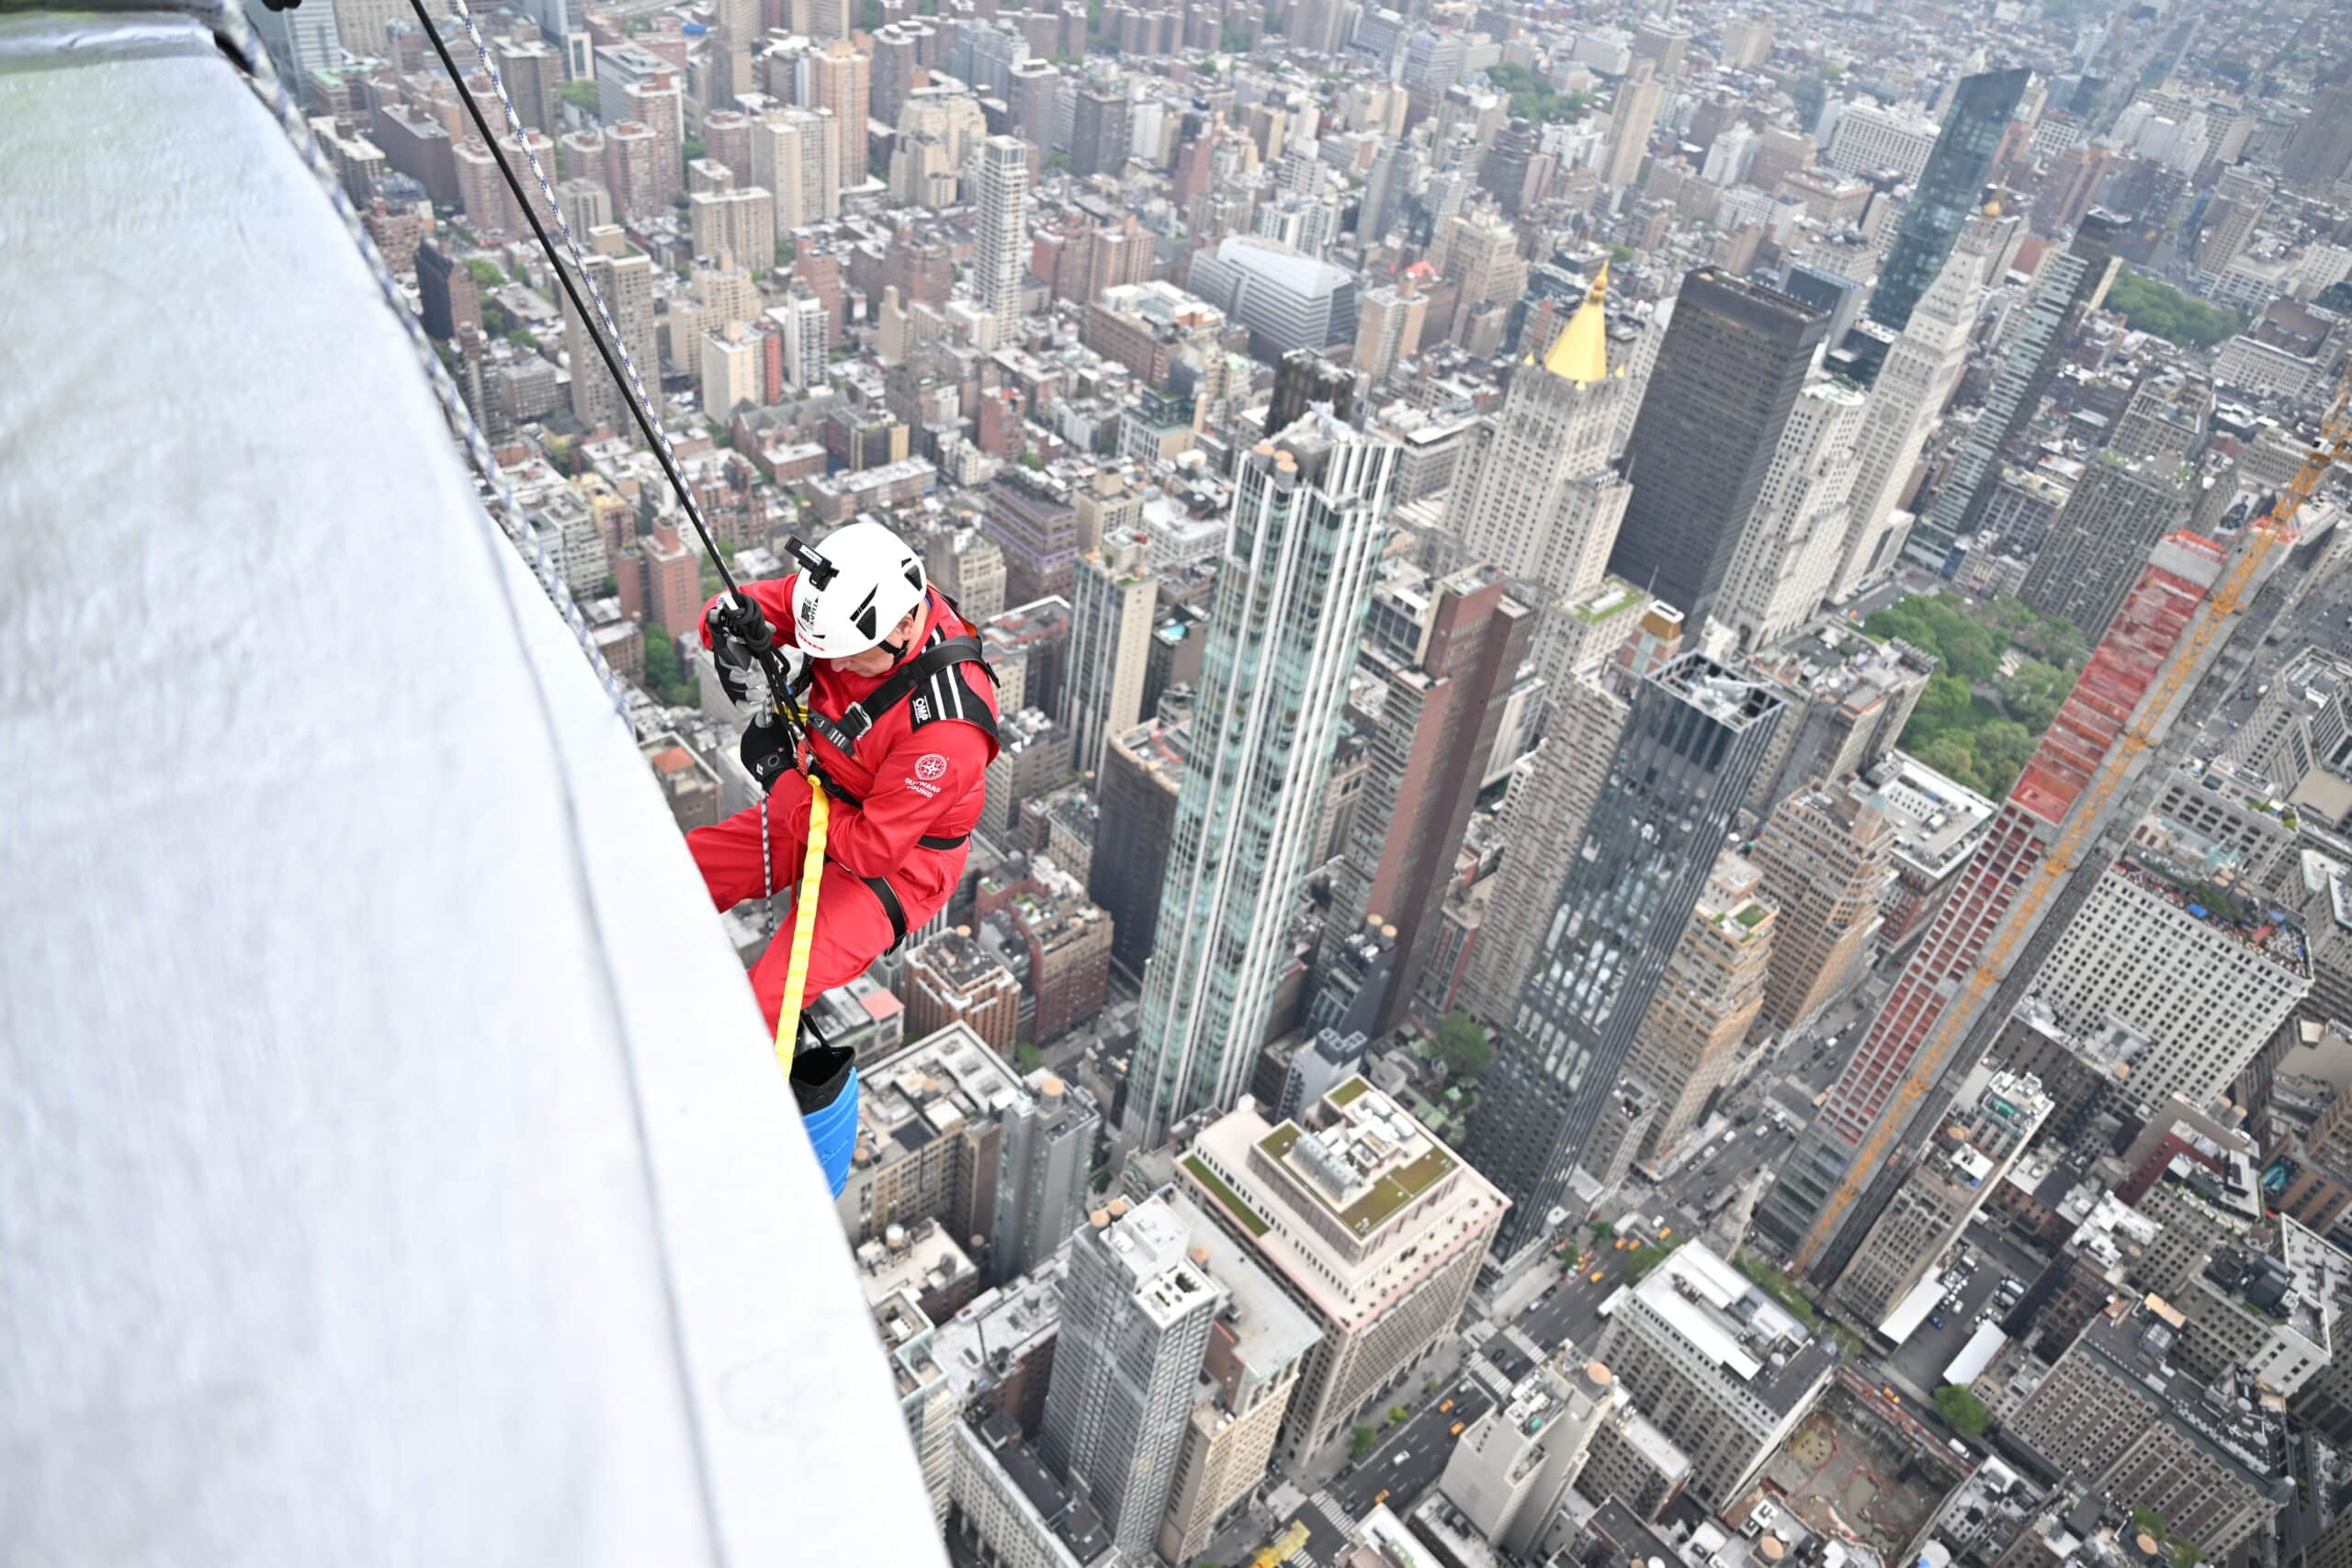 An abseiler in red suit steps off at the top of the Empire State Building, with New York City far below.